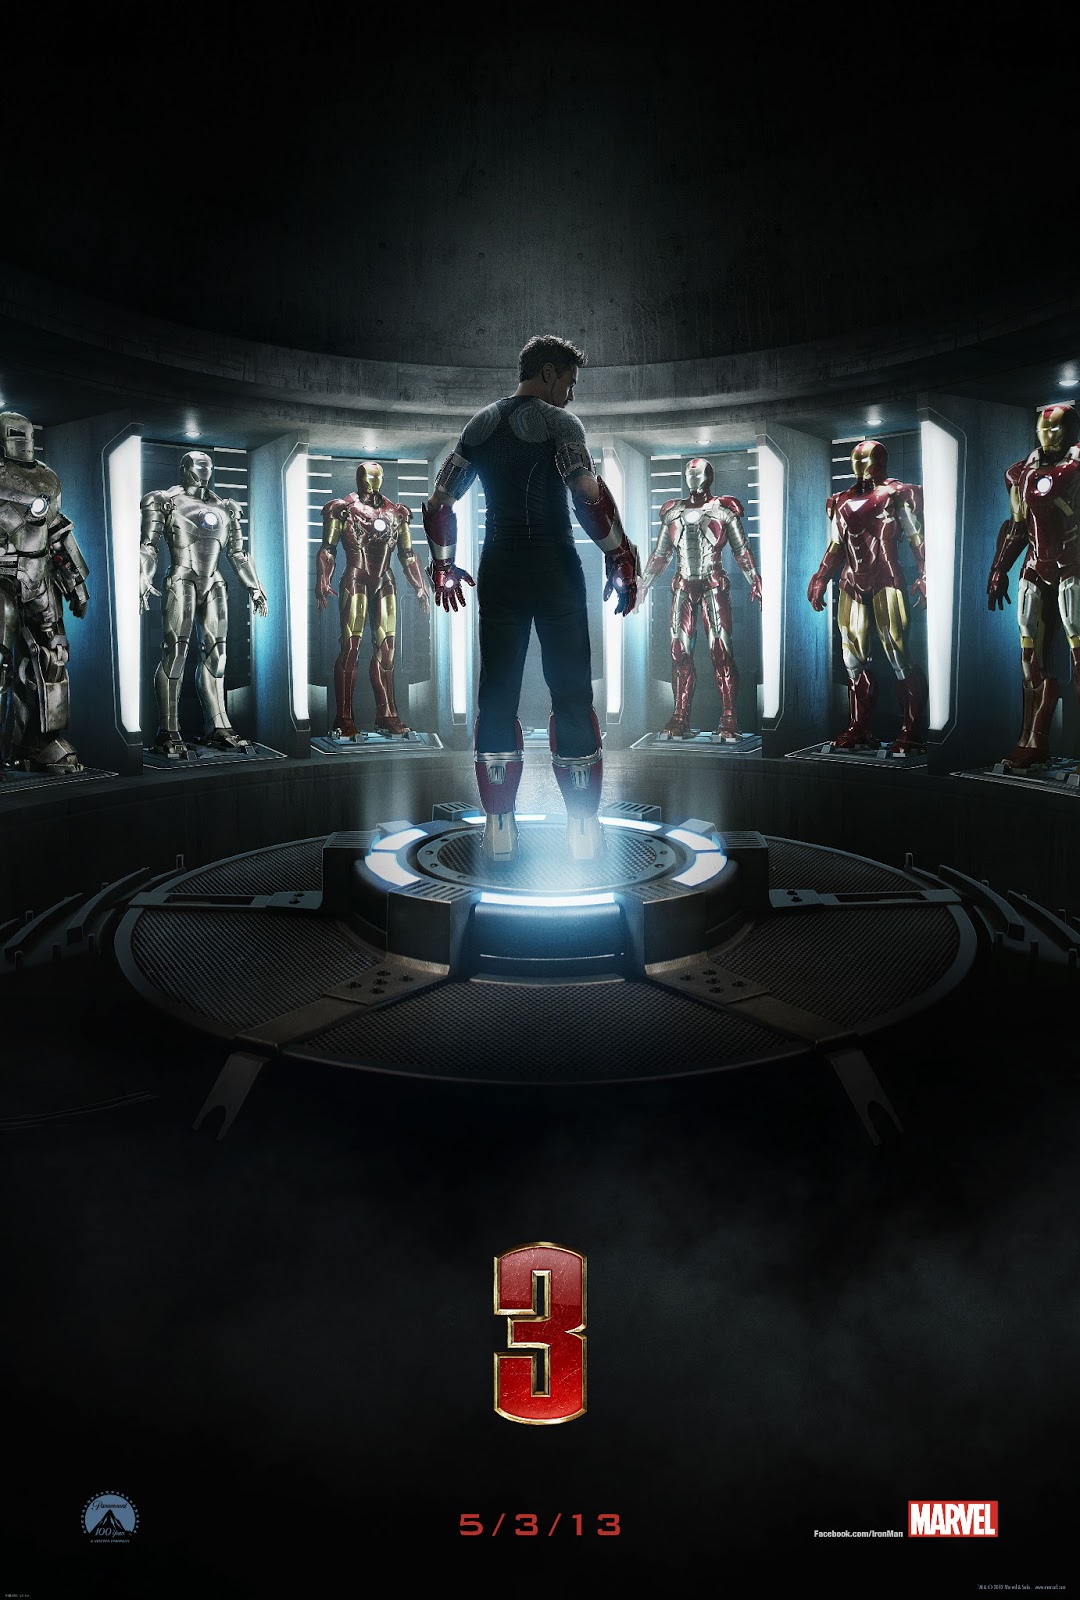 Iron Man 3 - Official Poster (2013)